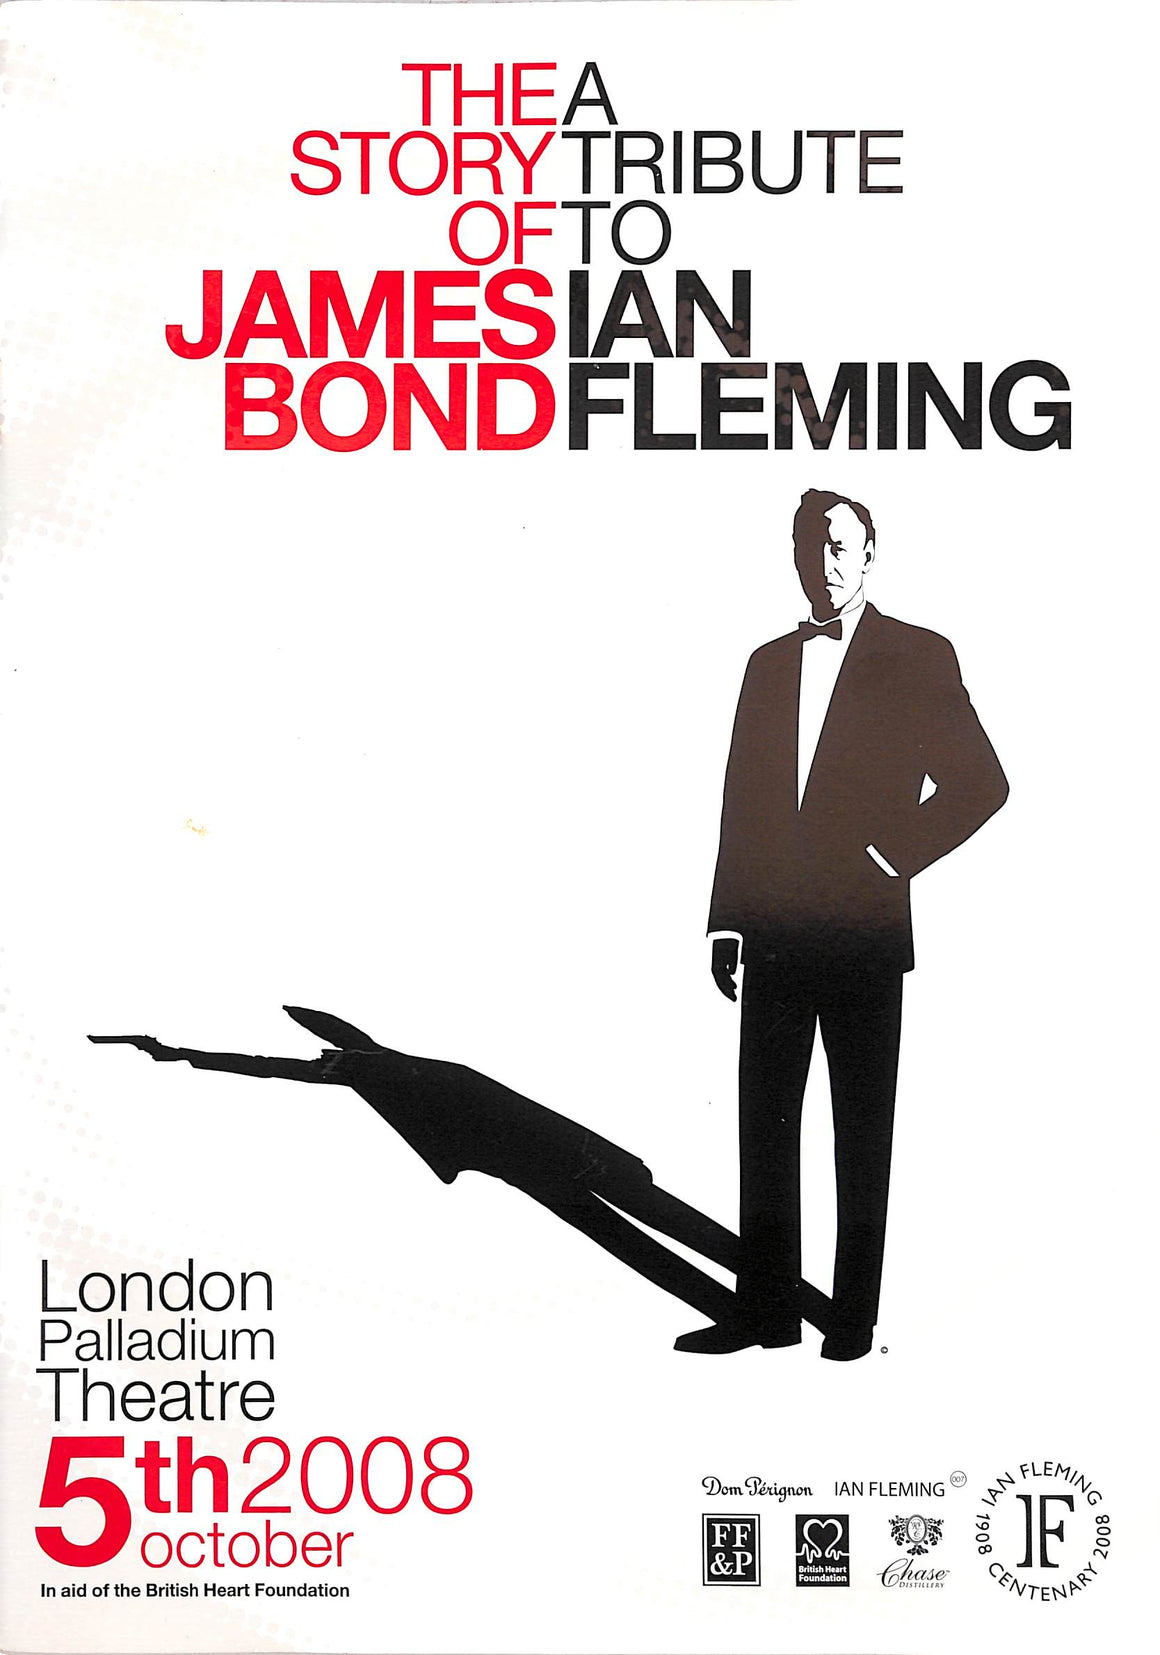 "The Story Of James Bond - A Tribute To Ian Fleming: London Palladium Theatre" 5th October 2008